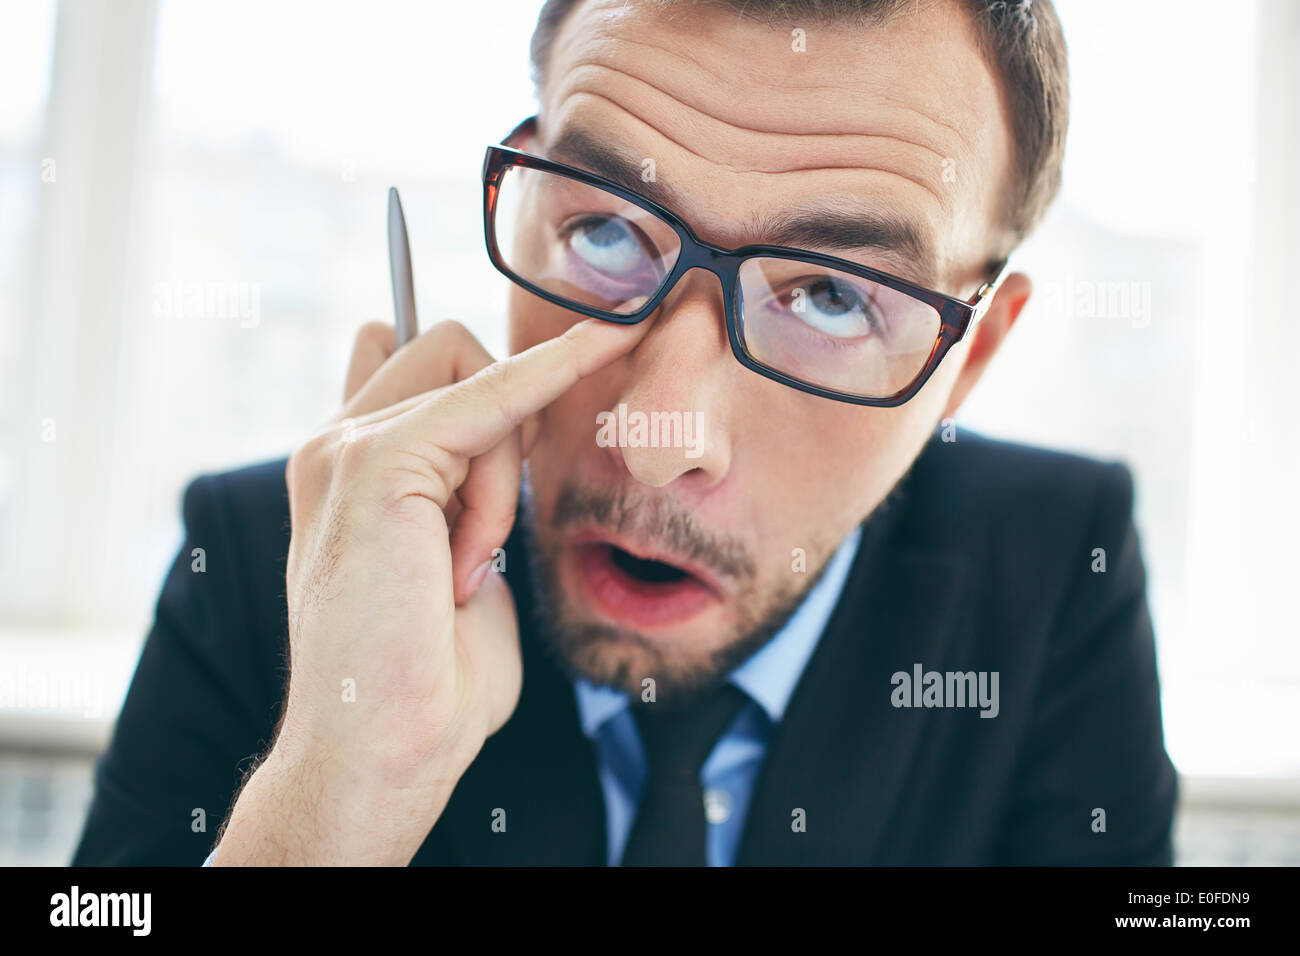 Face of funny businessman in eyeglasses rubbing eye Stock Photo